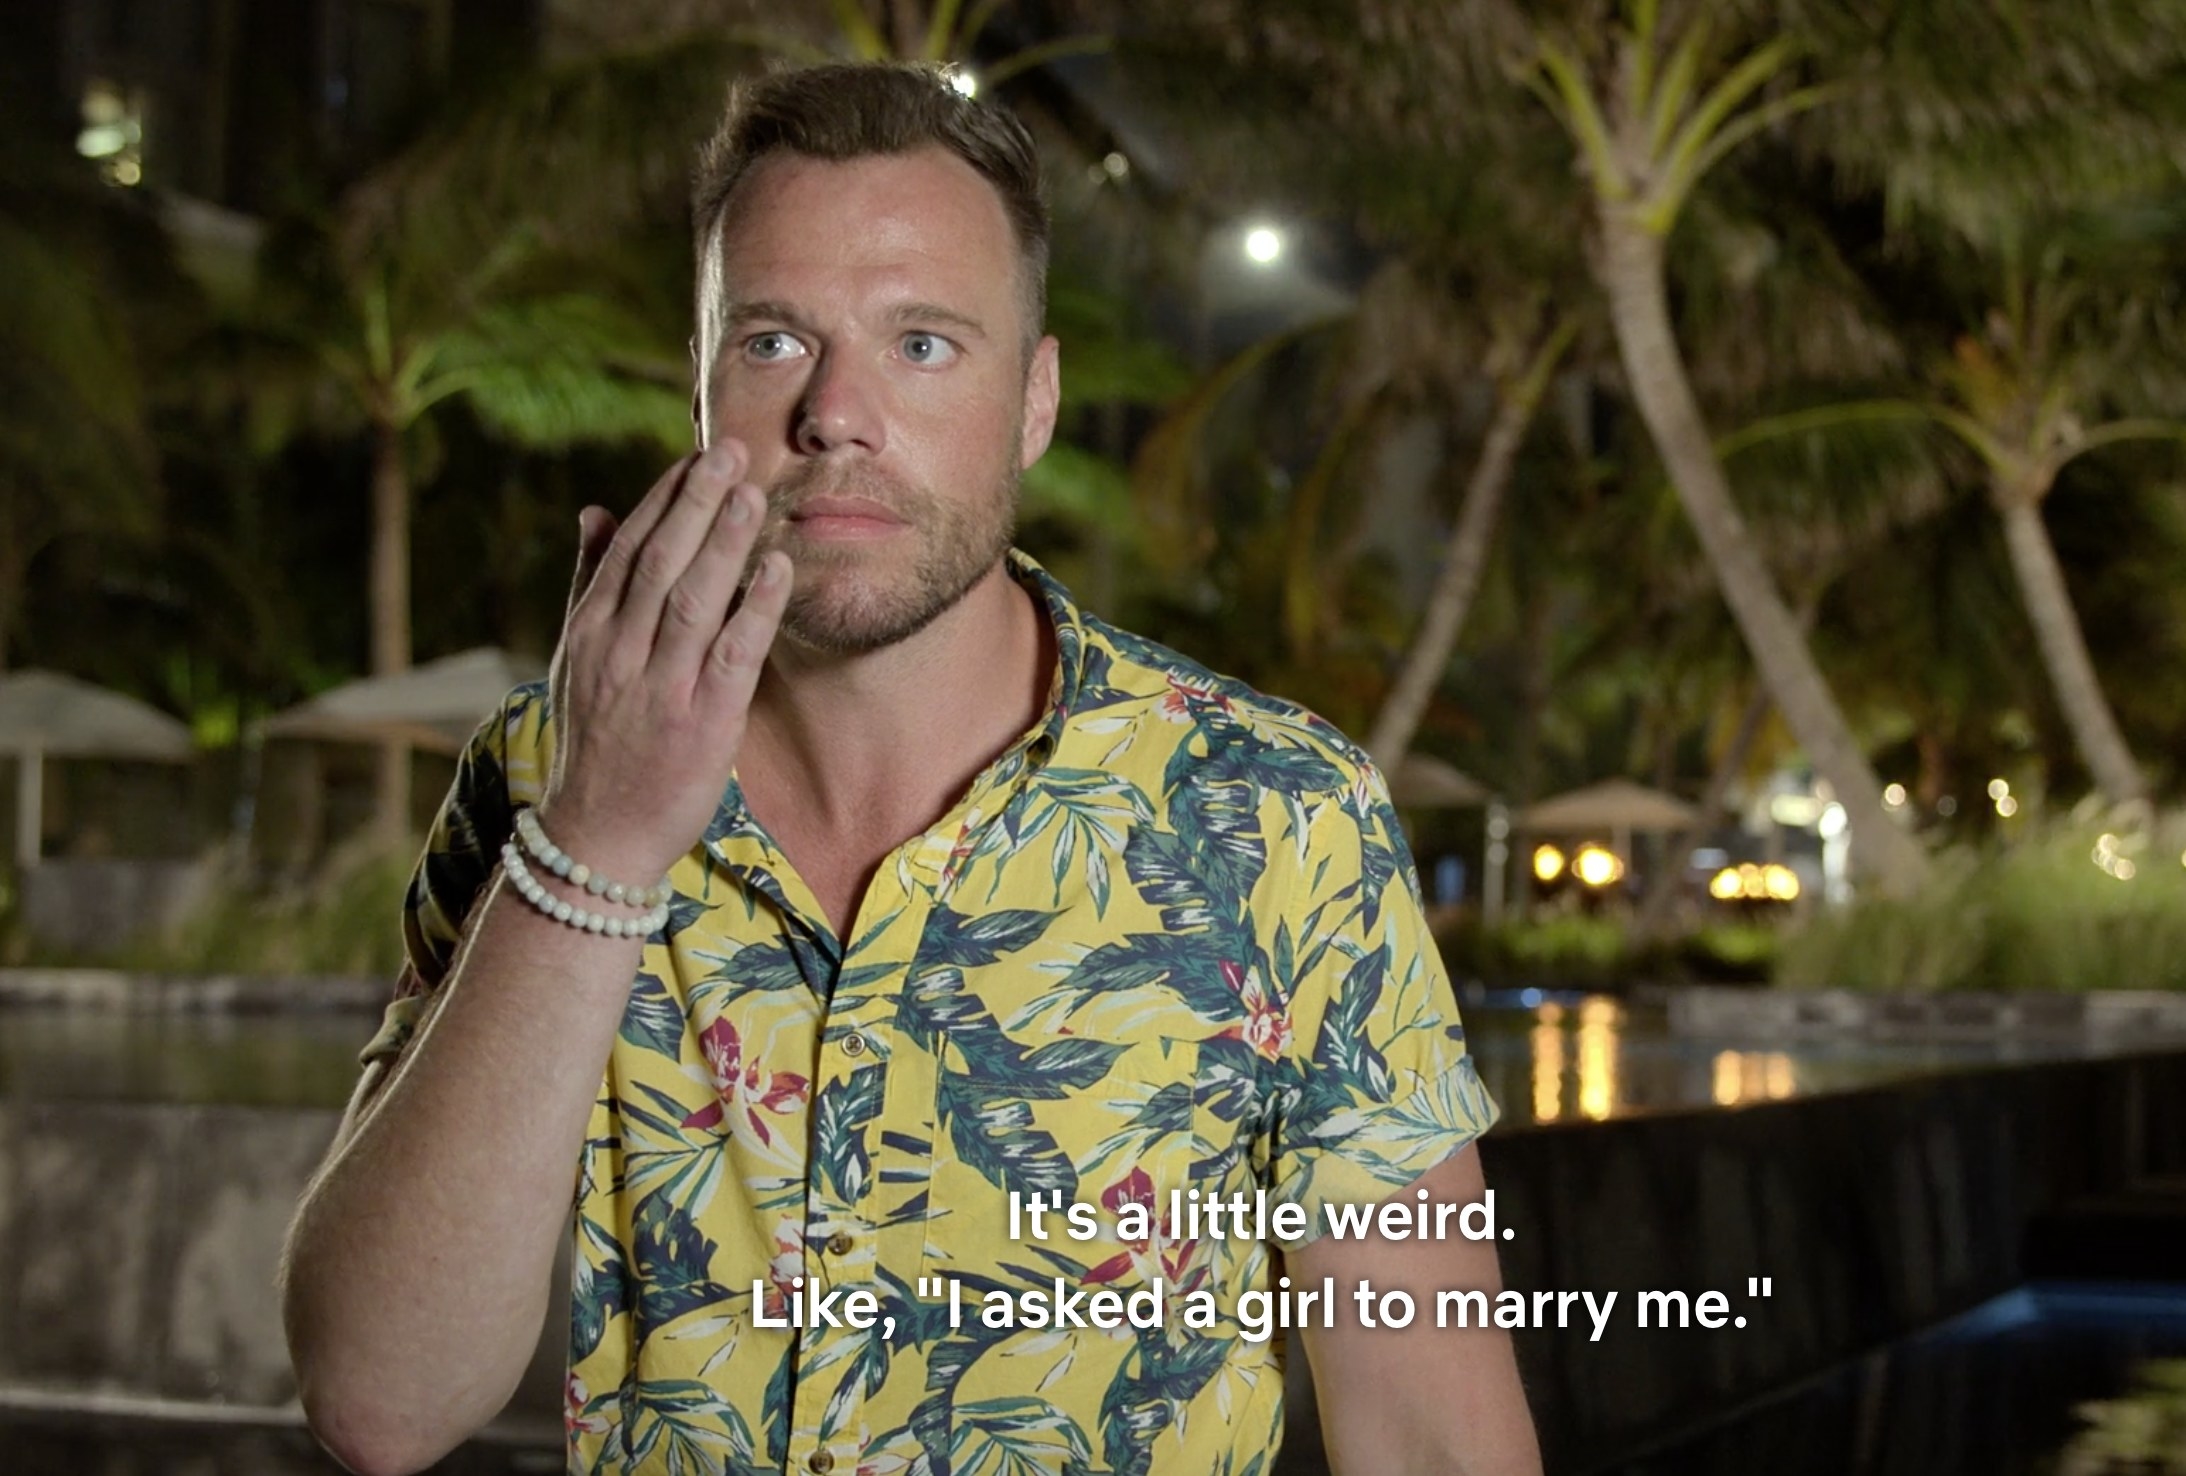 Nick saying &quot;It&#x27;s a little weird. Like, &#x27;I asked a girl to marry me.&#x27;&quot;